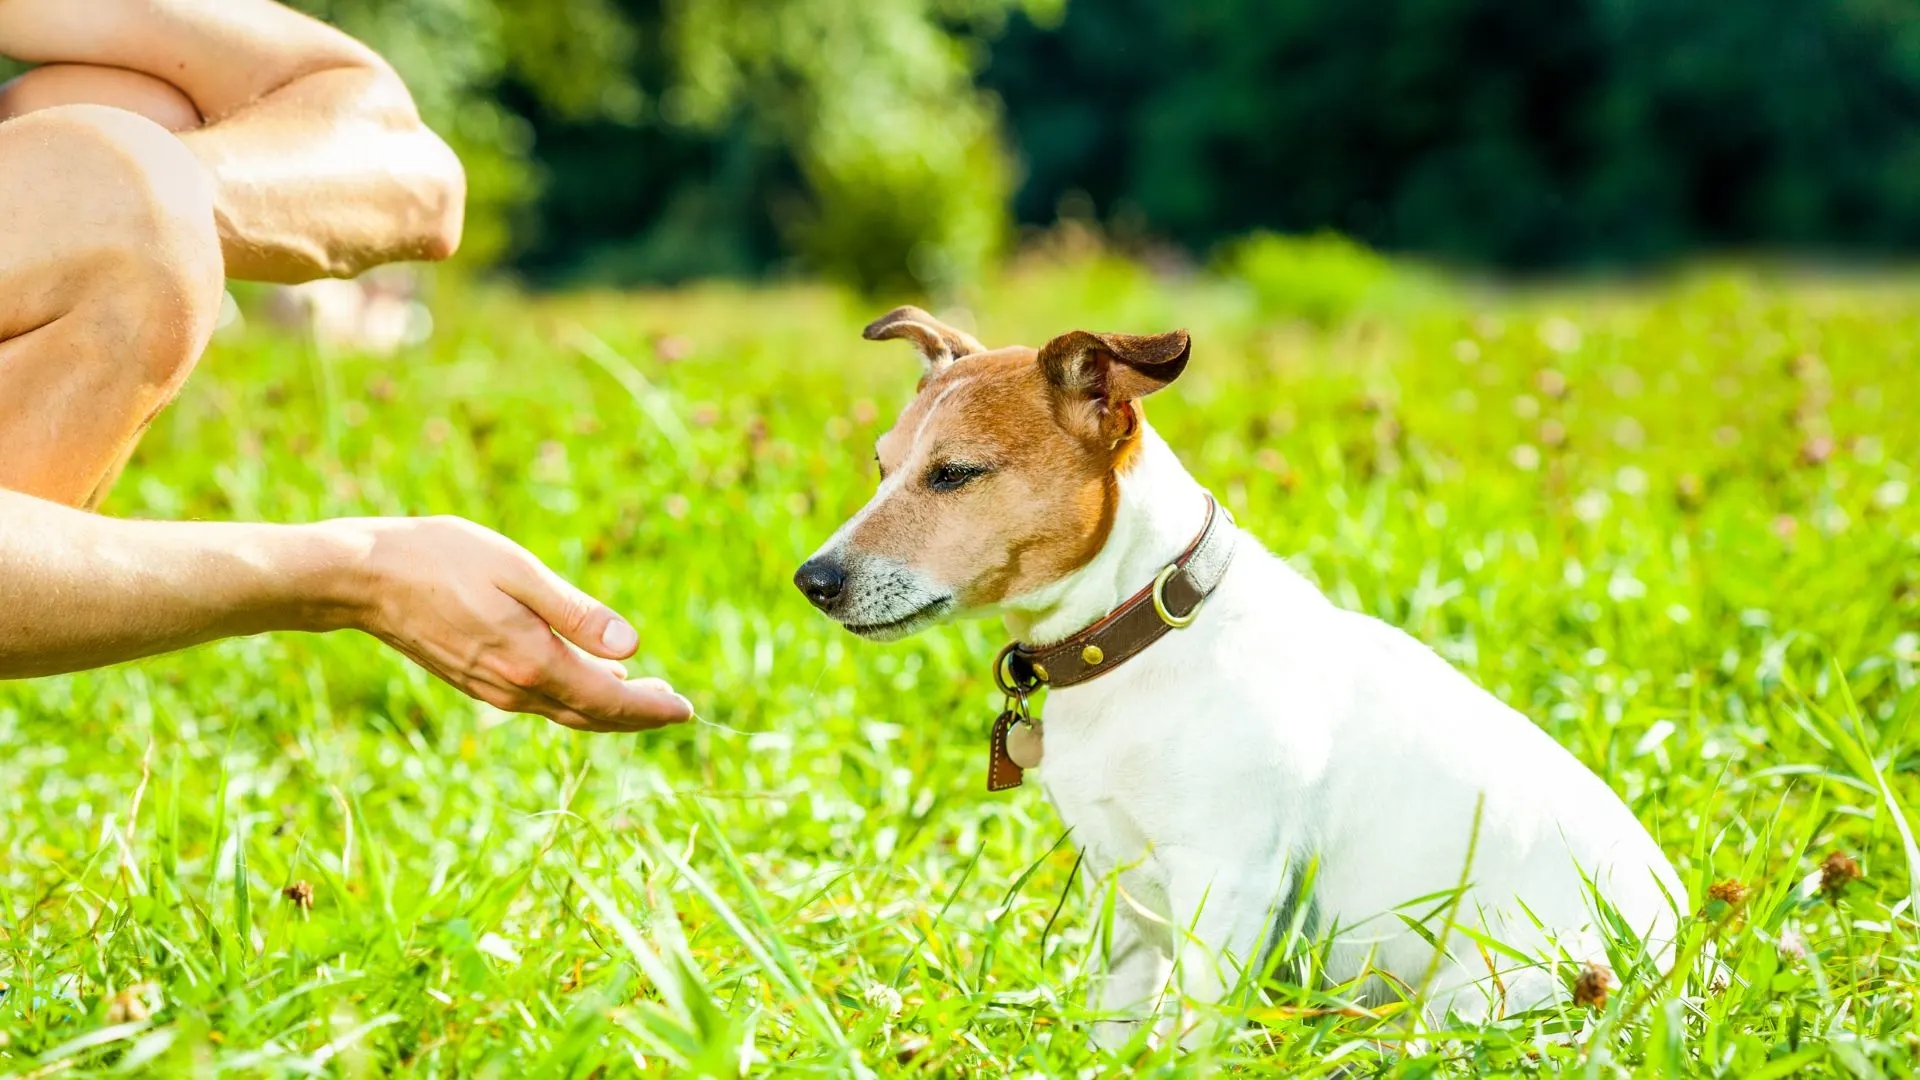 dog in nature looking at the owner's hand